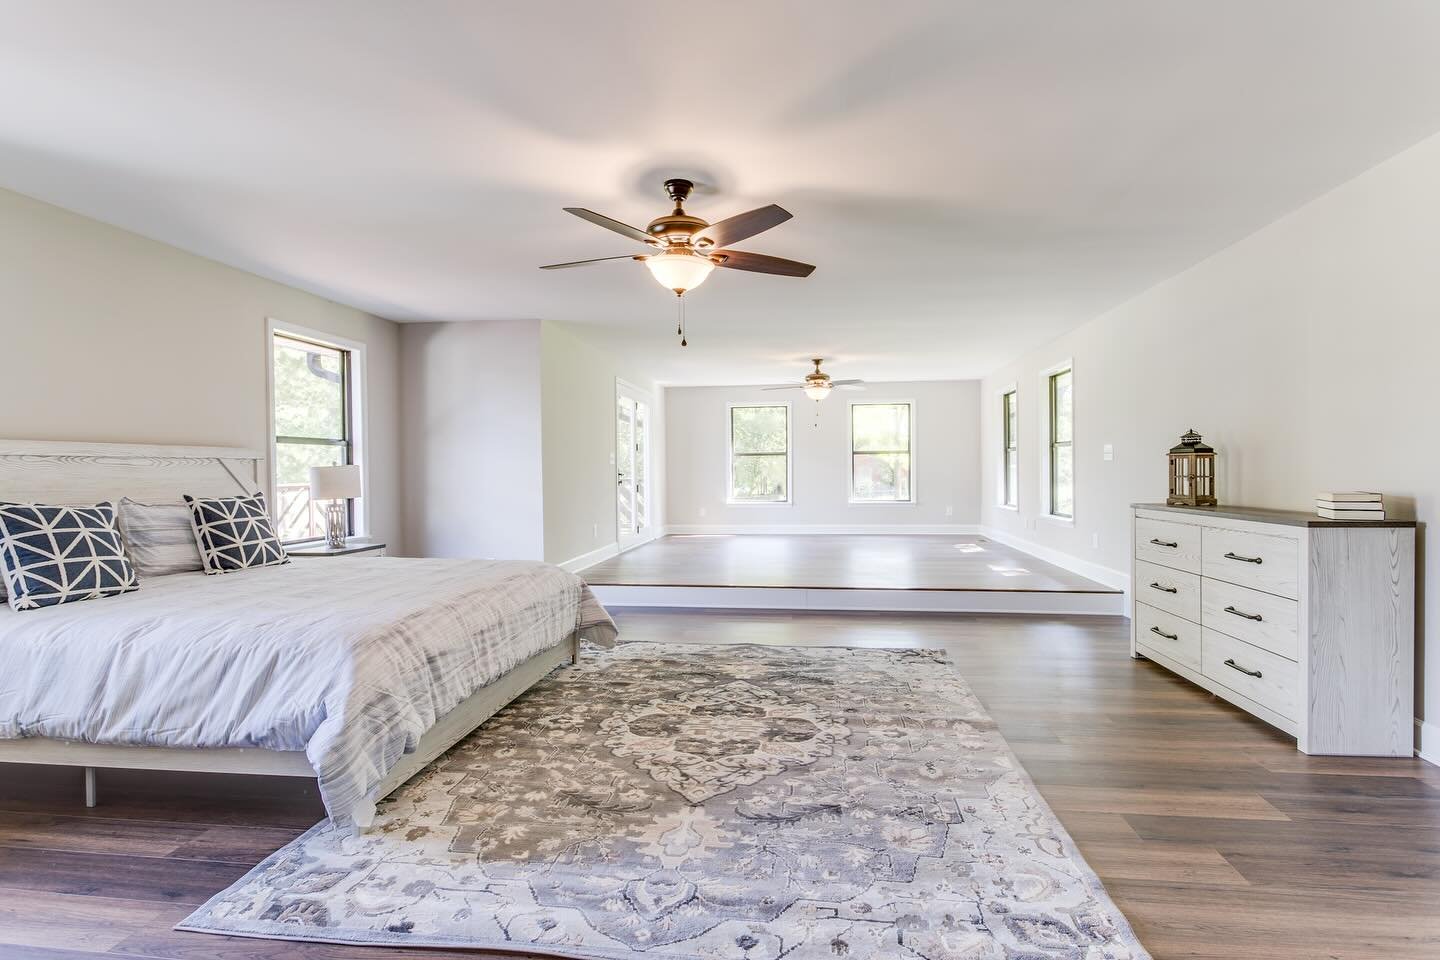 Can you believe there used to be an indoor hot tub in this space?! You never know what you&rsquo;re going to find when you start a renovation. 

Now, our home owners have a beautiful, extra large master bedroom with space for a home office or whateve